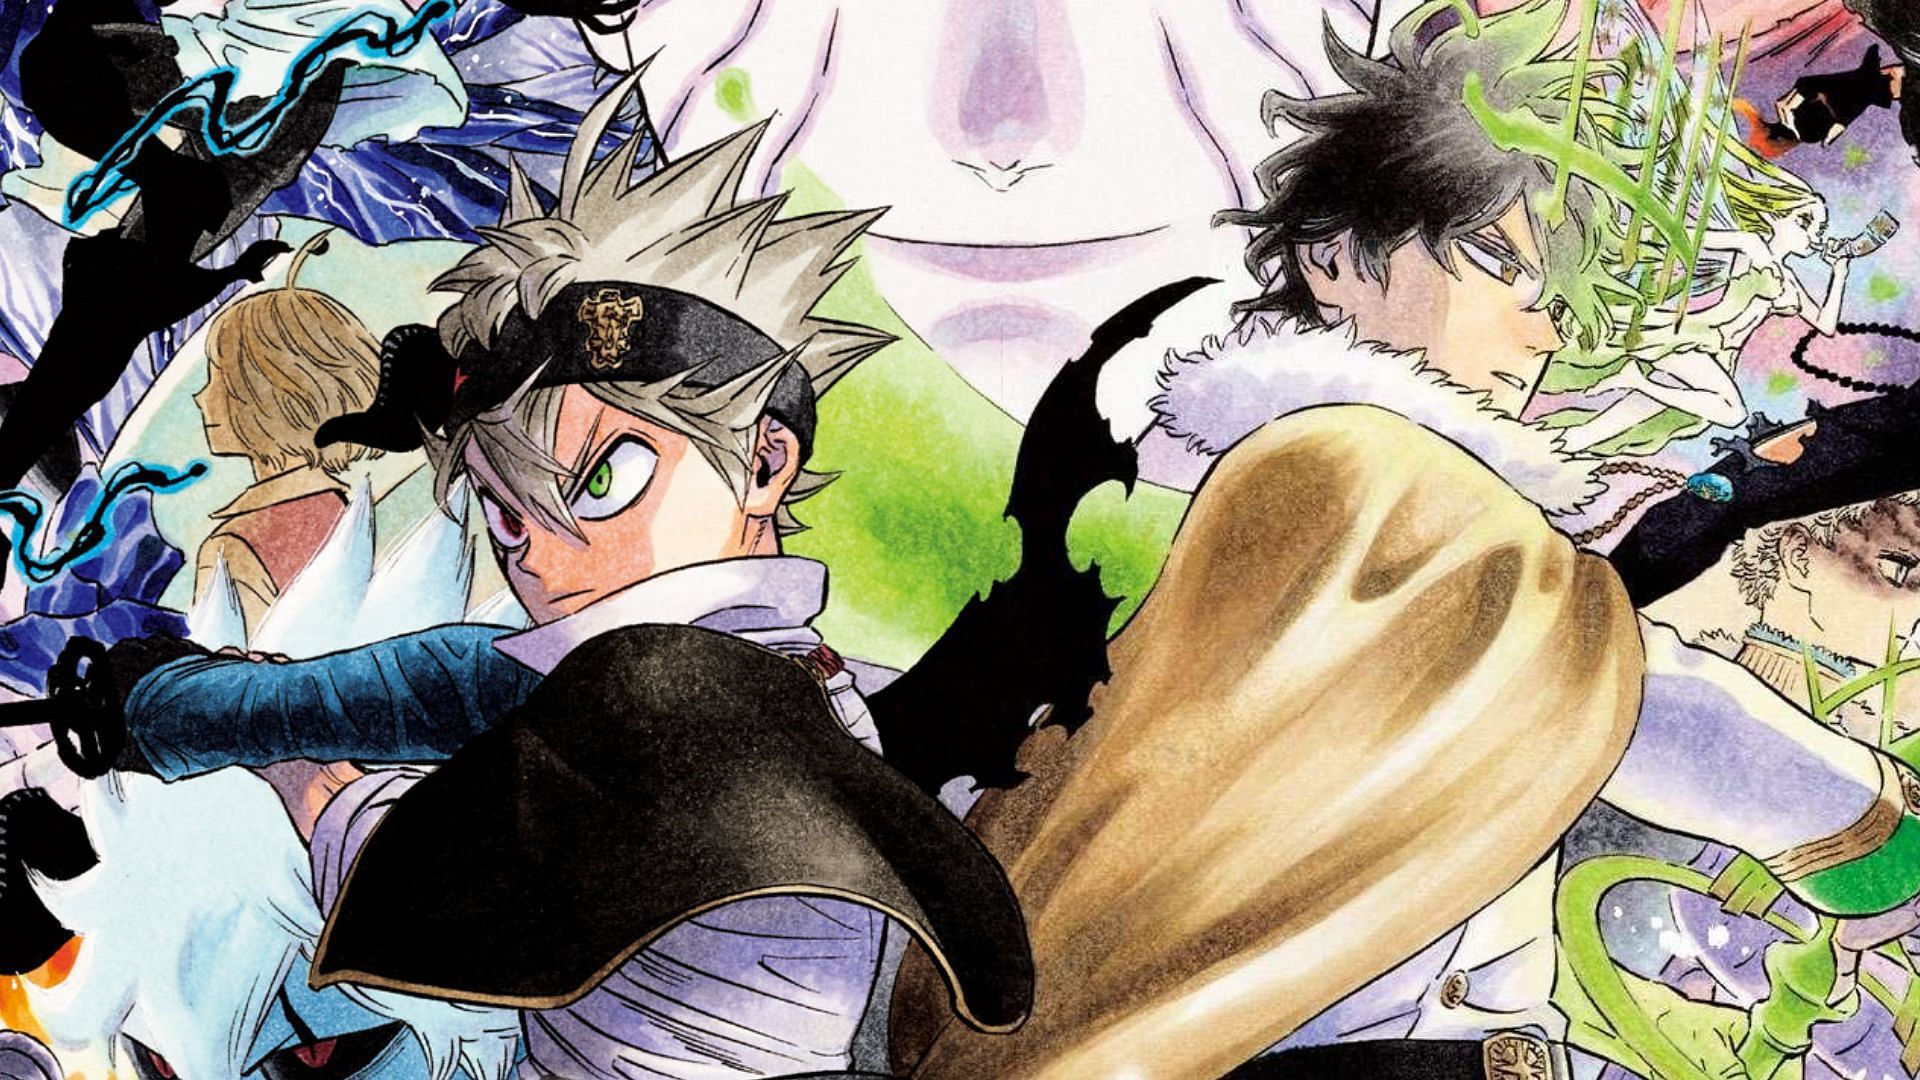 Black Clover chapter 369: Black Bulls vs Lucius continues and Asta and Yuno join forces